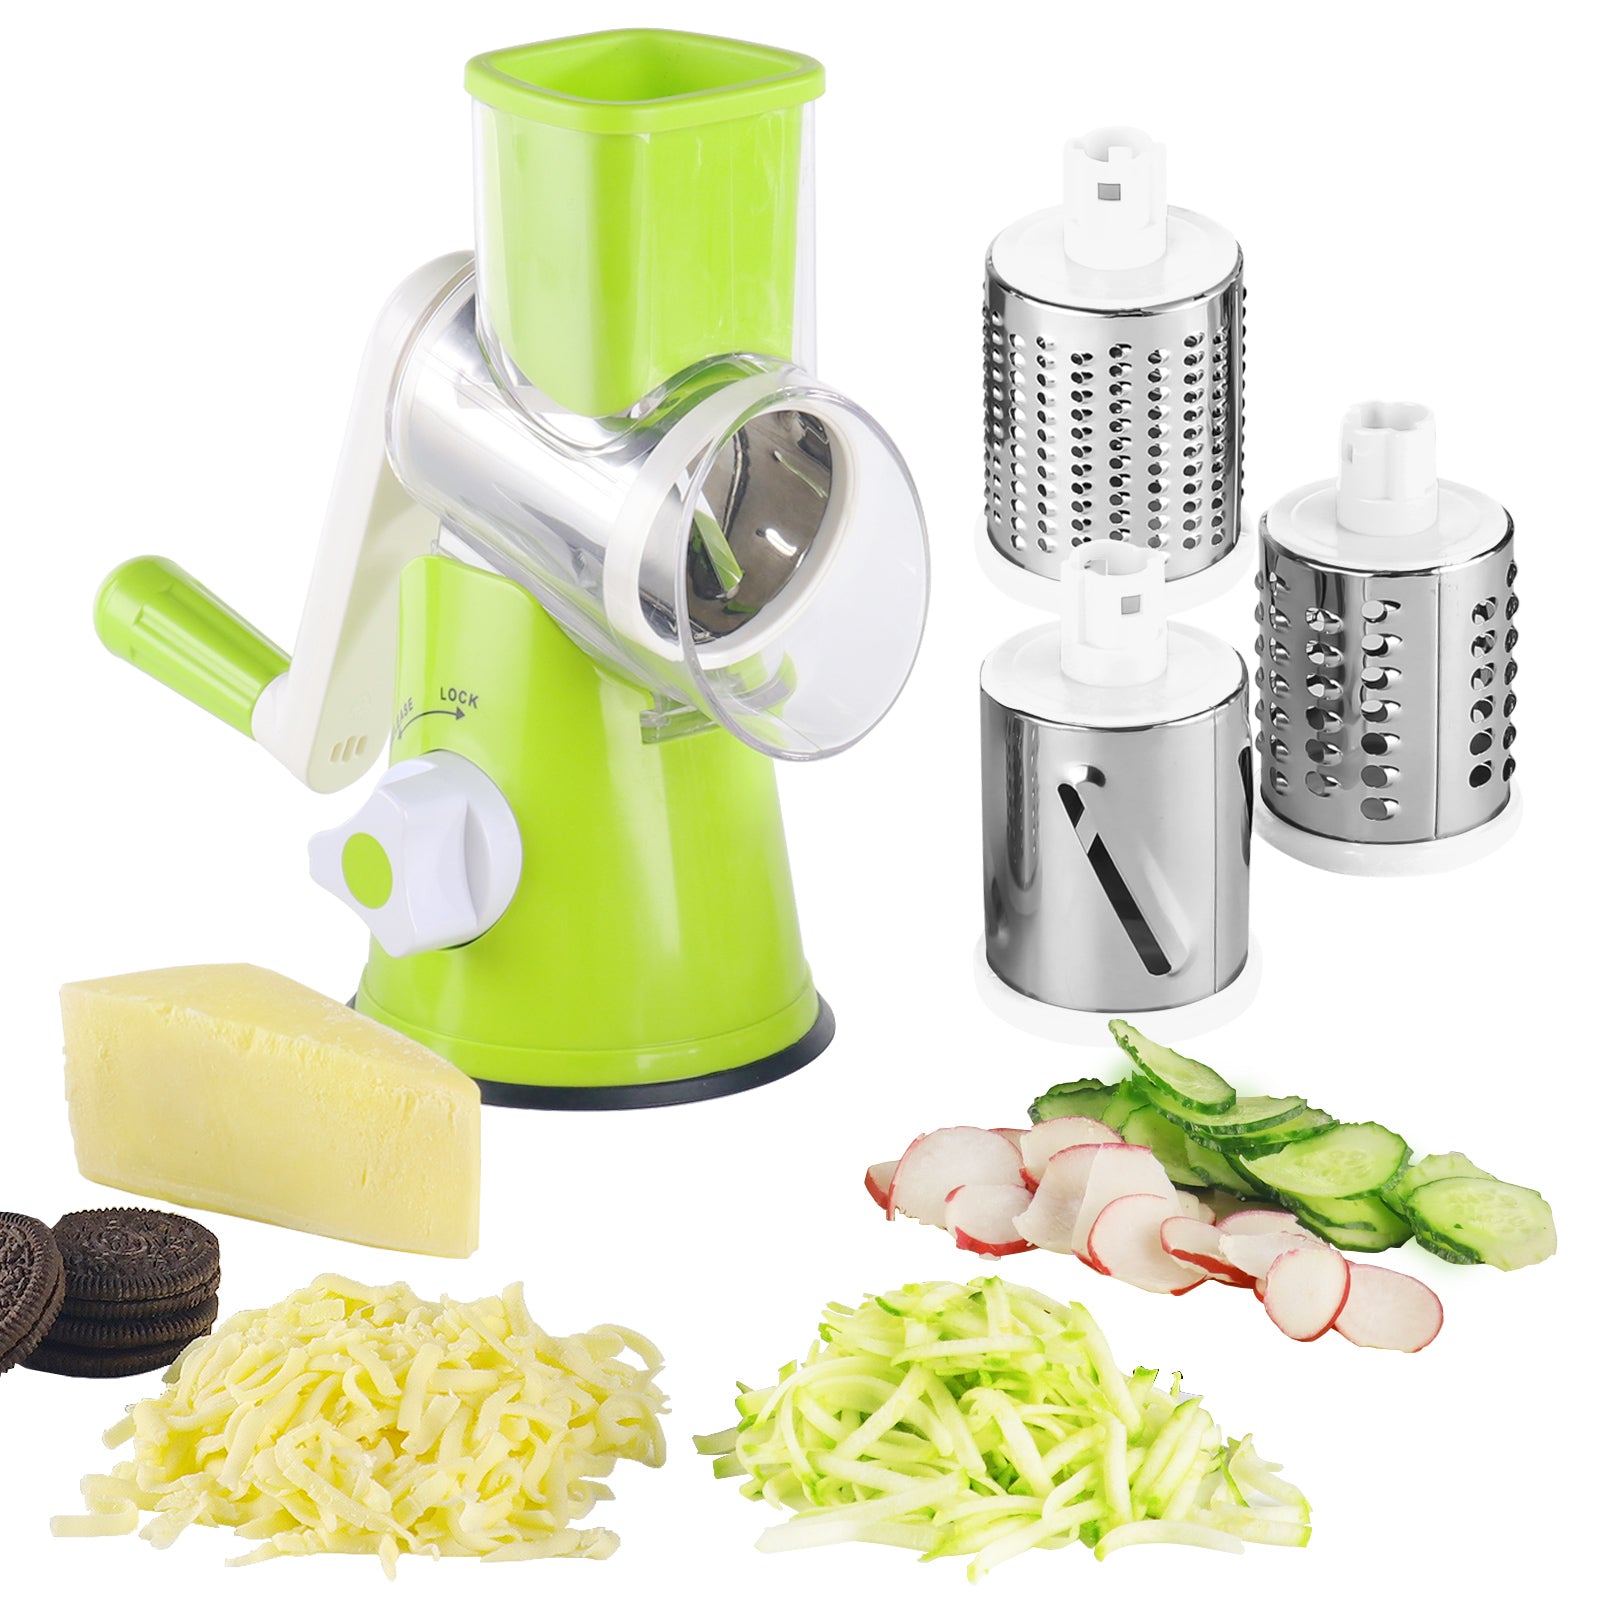 Rotary Cheese Grater with 5 Interchangeable Blades